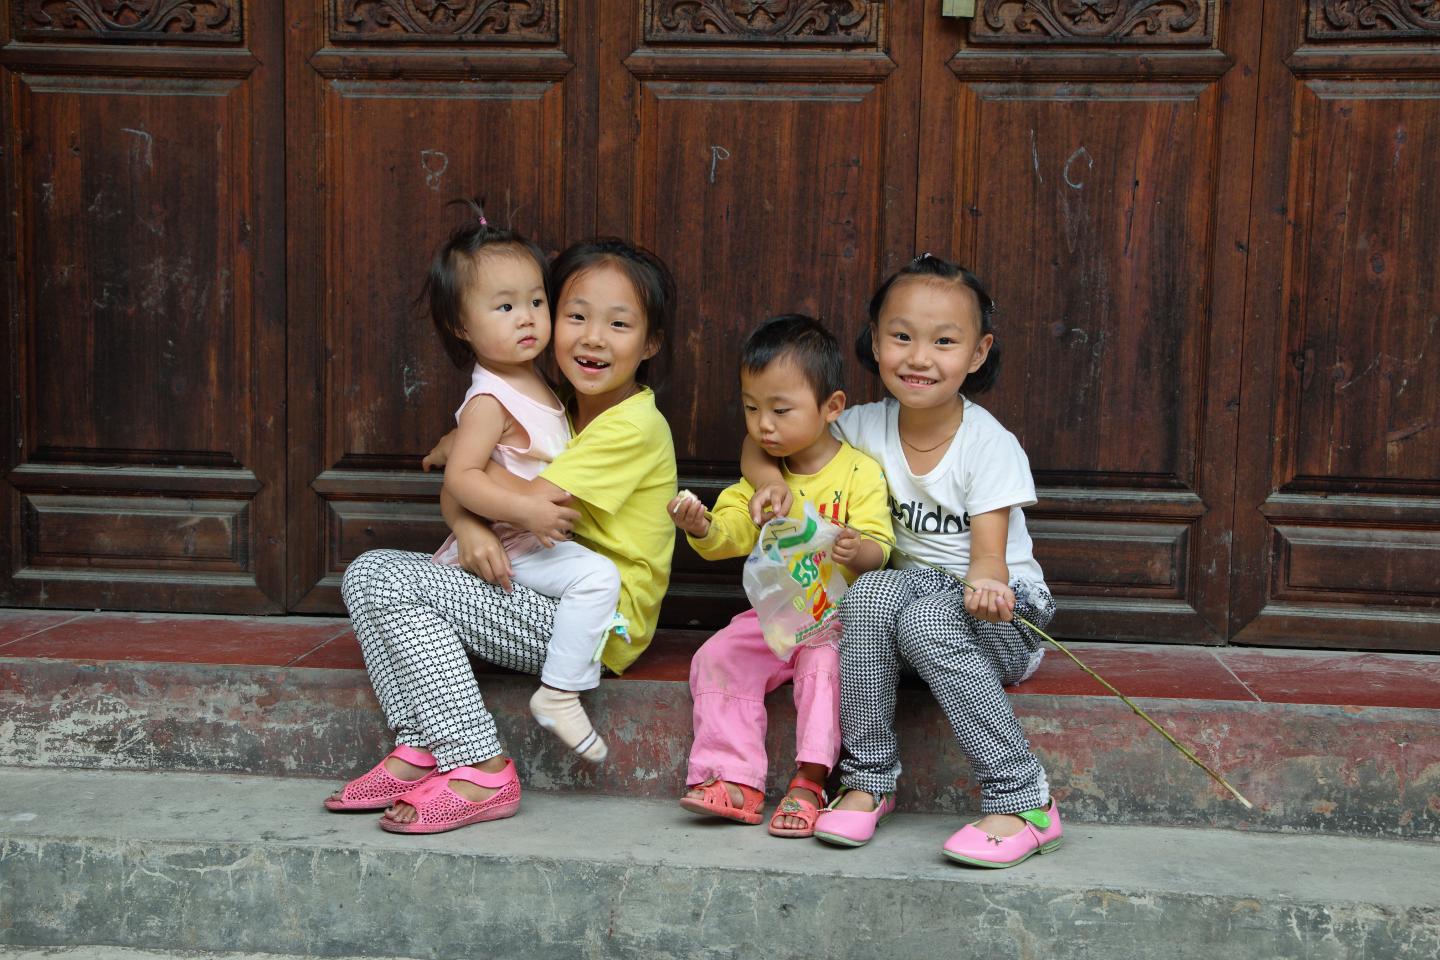 Rapid Infectious Disease Shifts in Chinese Children and Adolescents Prior to COVID-19